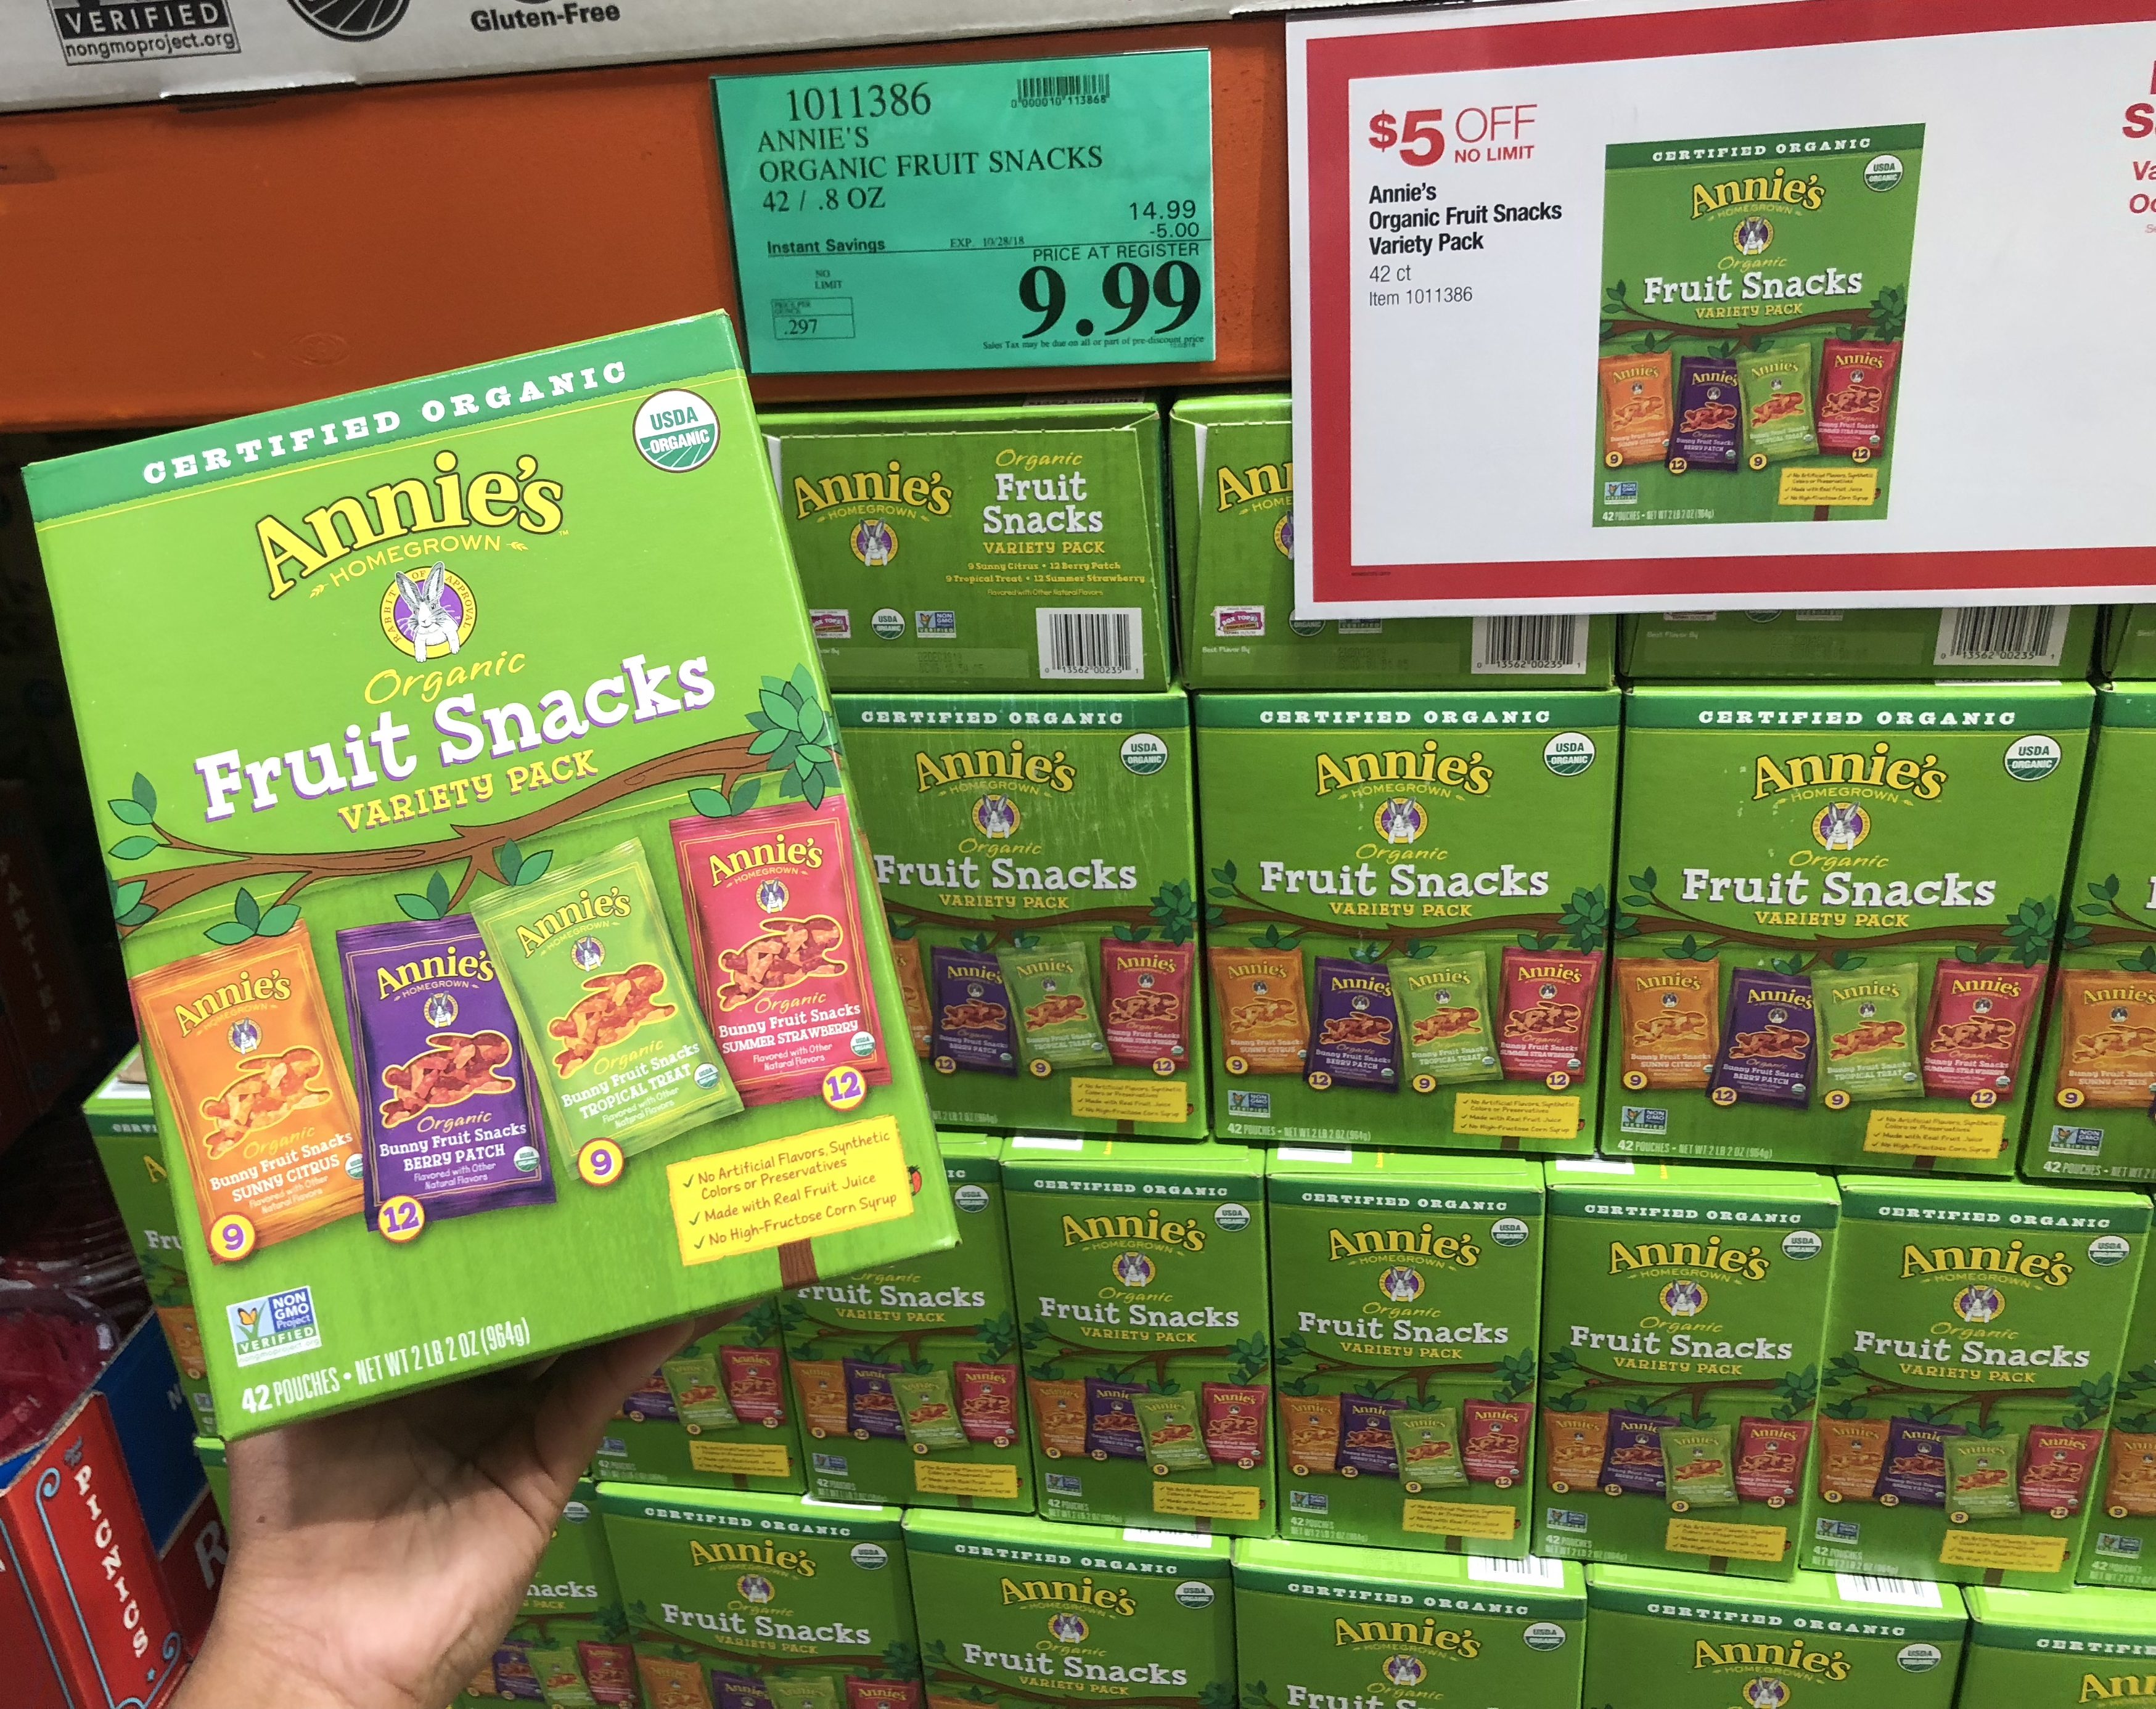 https://hip2save.com/wp-content/uploads/2018/10/annies-fruit-snacks-at-costco-e1539030153566.jpg?resize=3497%2C2772&strip=all